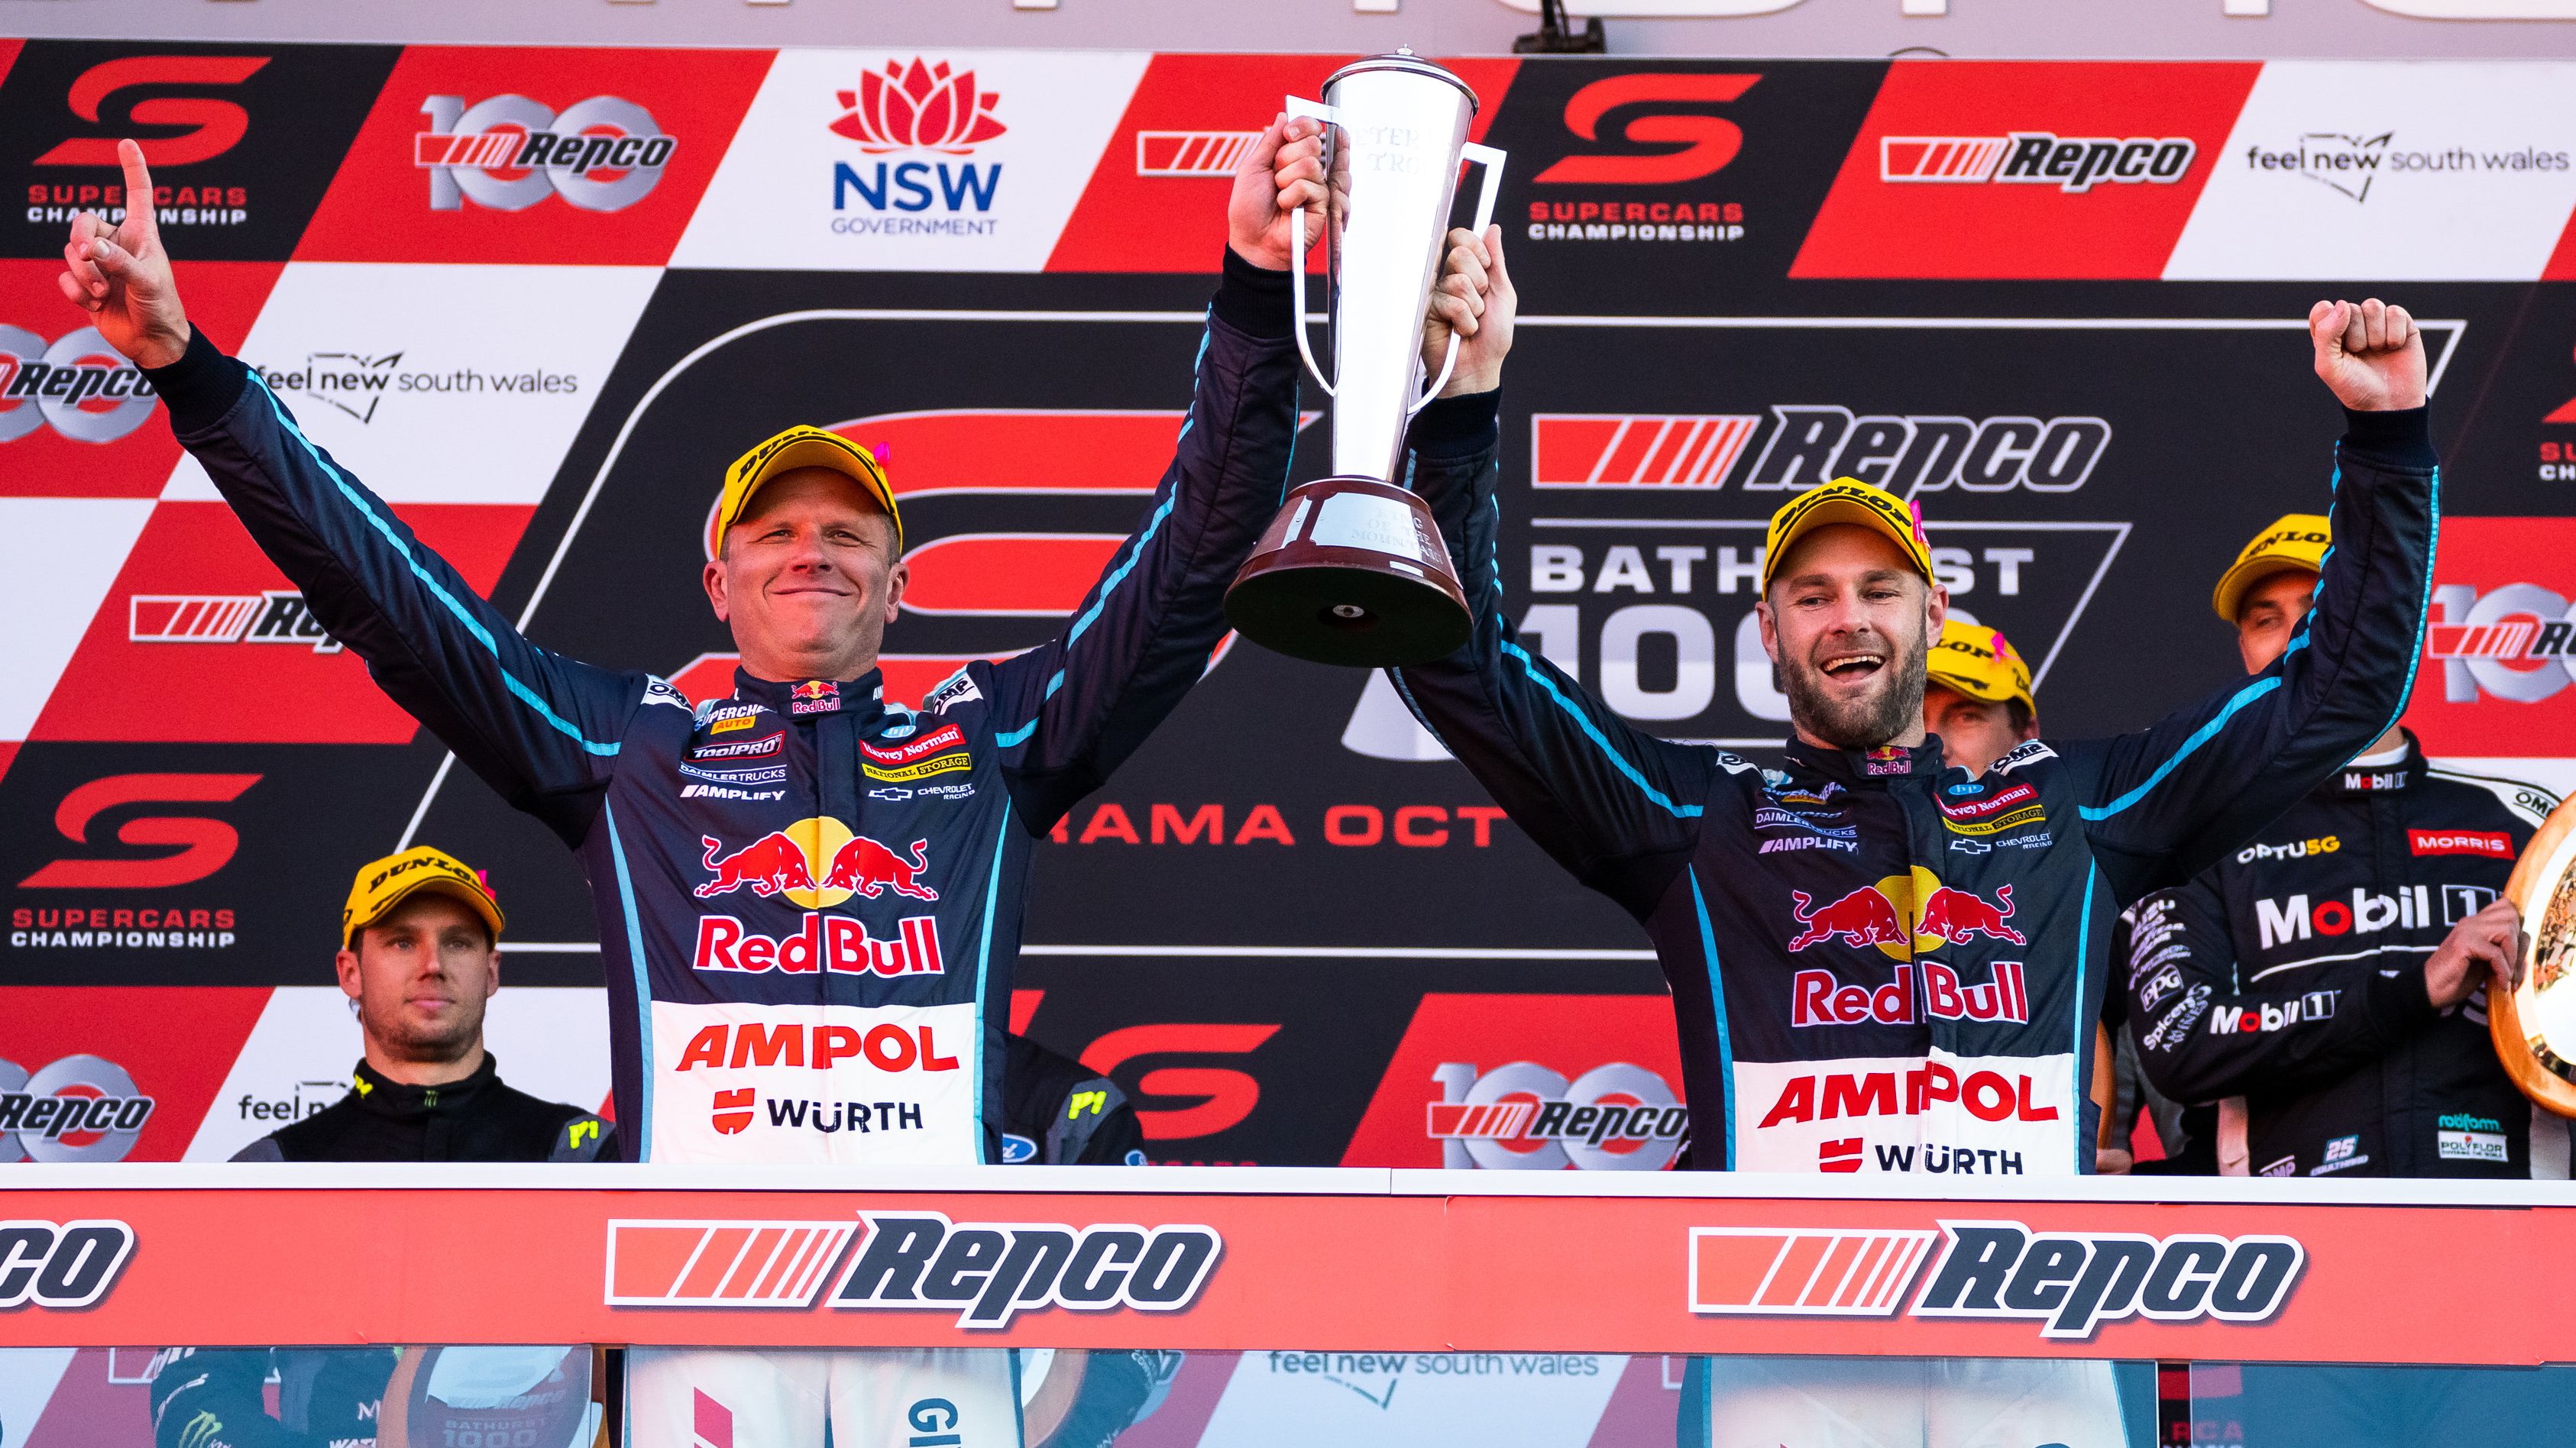 Shane van Gisbergen driver of the #97 Red Bull Ampol Holden Commodore ZB and Garth Tander driver of the #97 Red Bull Ampol Holden Commodore ZB celebrate after winning the Bathurst 1000, which is race 30 of 2022 Supercars Championship Season at Mount Panorama on October 09, 2022 in Bathurst, Australia. (Photo by Daniel Kalisz/Getty Images)